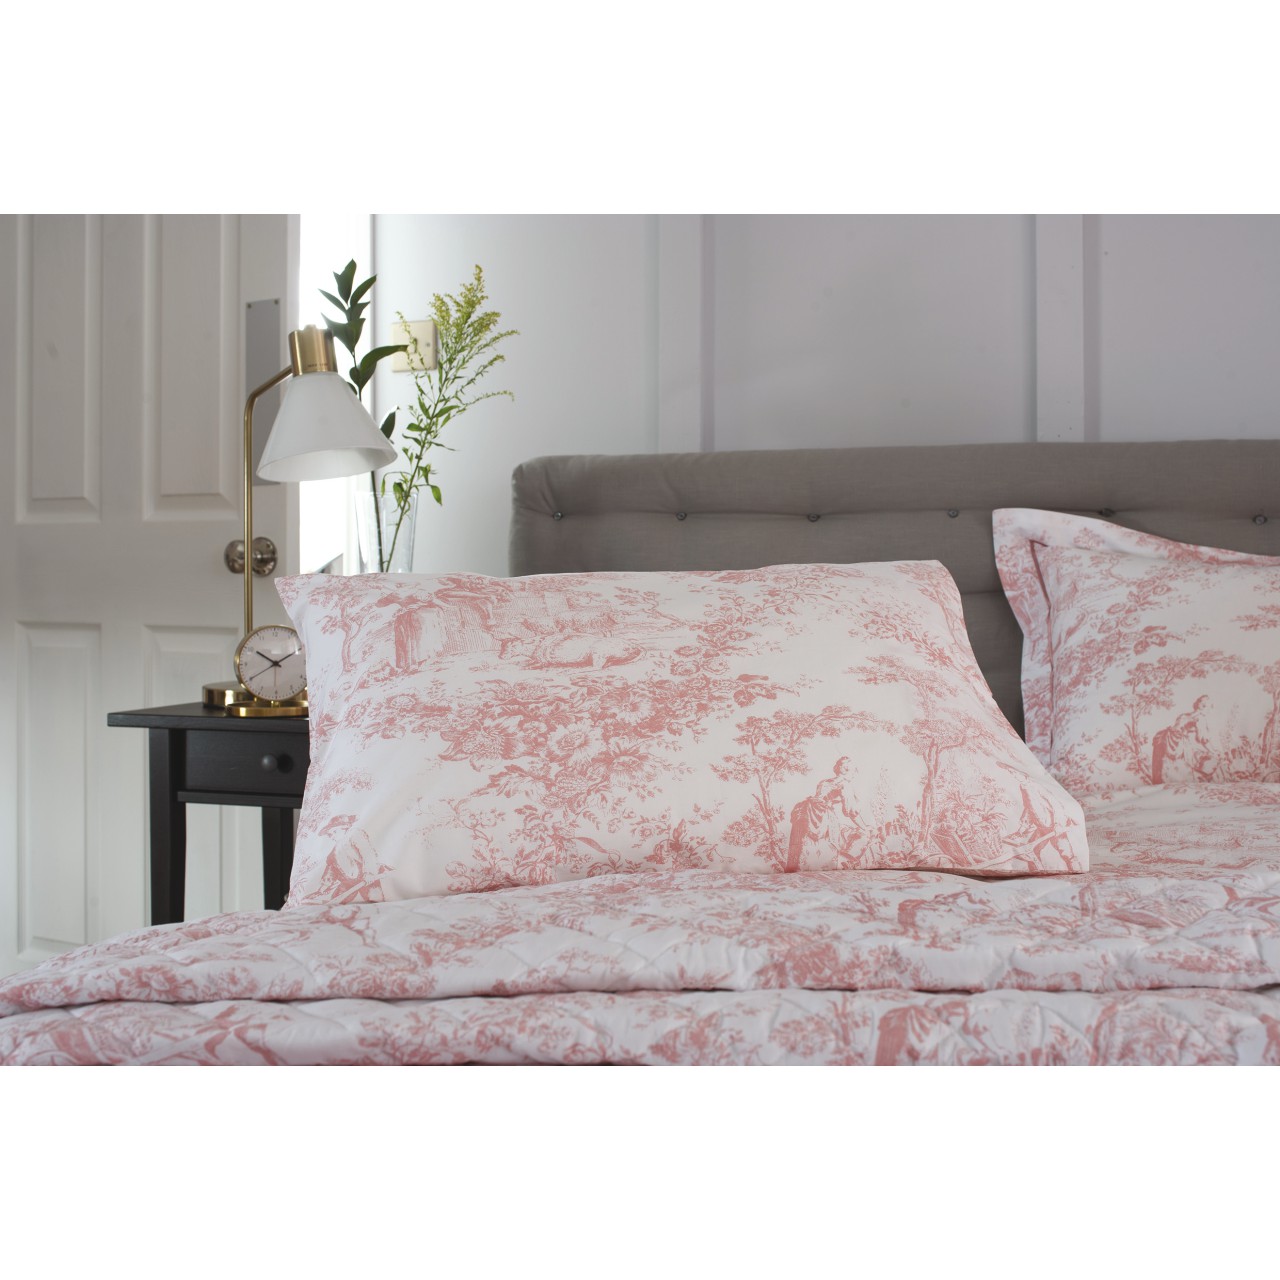 Toile-de-Jouy Housewife Pillowcases - Pair